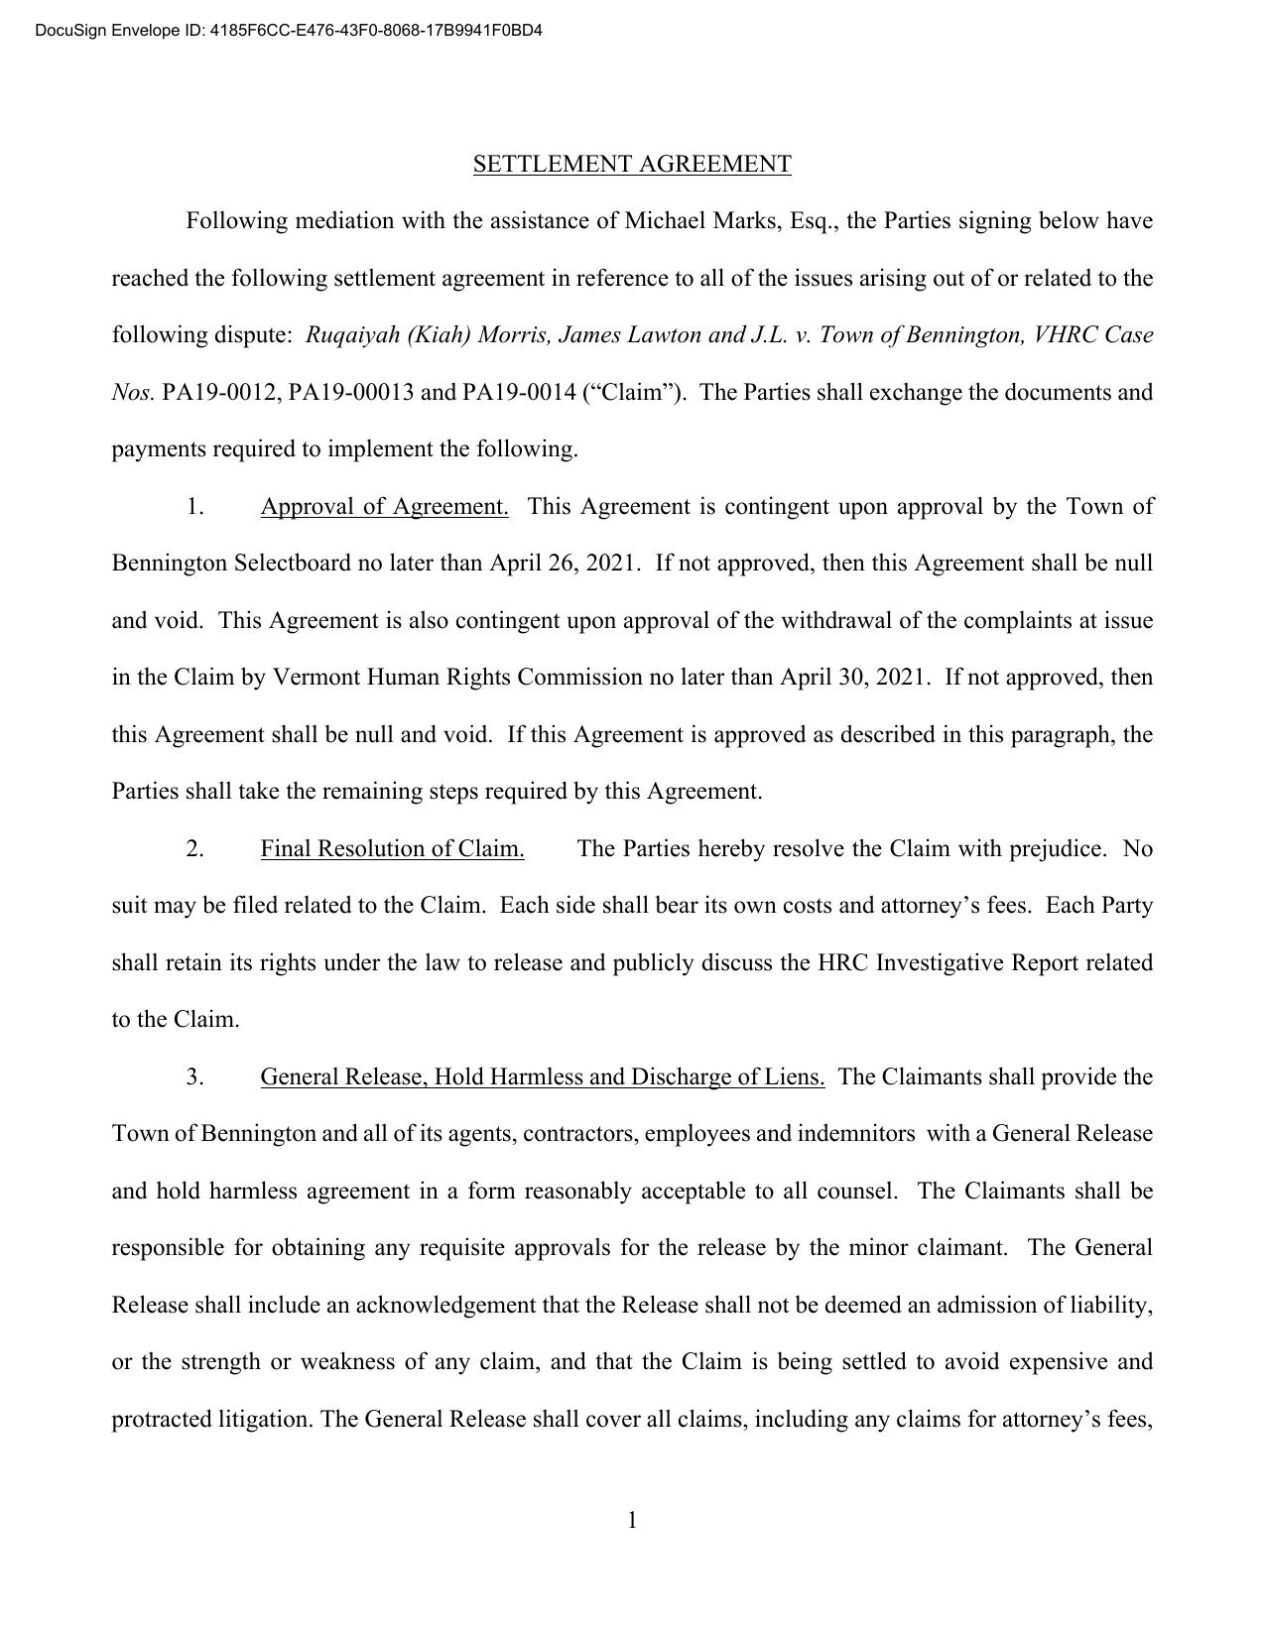 Settlement agreement between the town of Bennington and Kiah Morris and her family